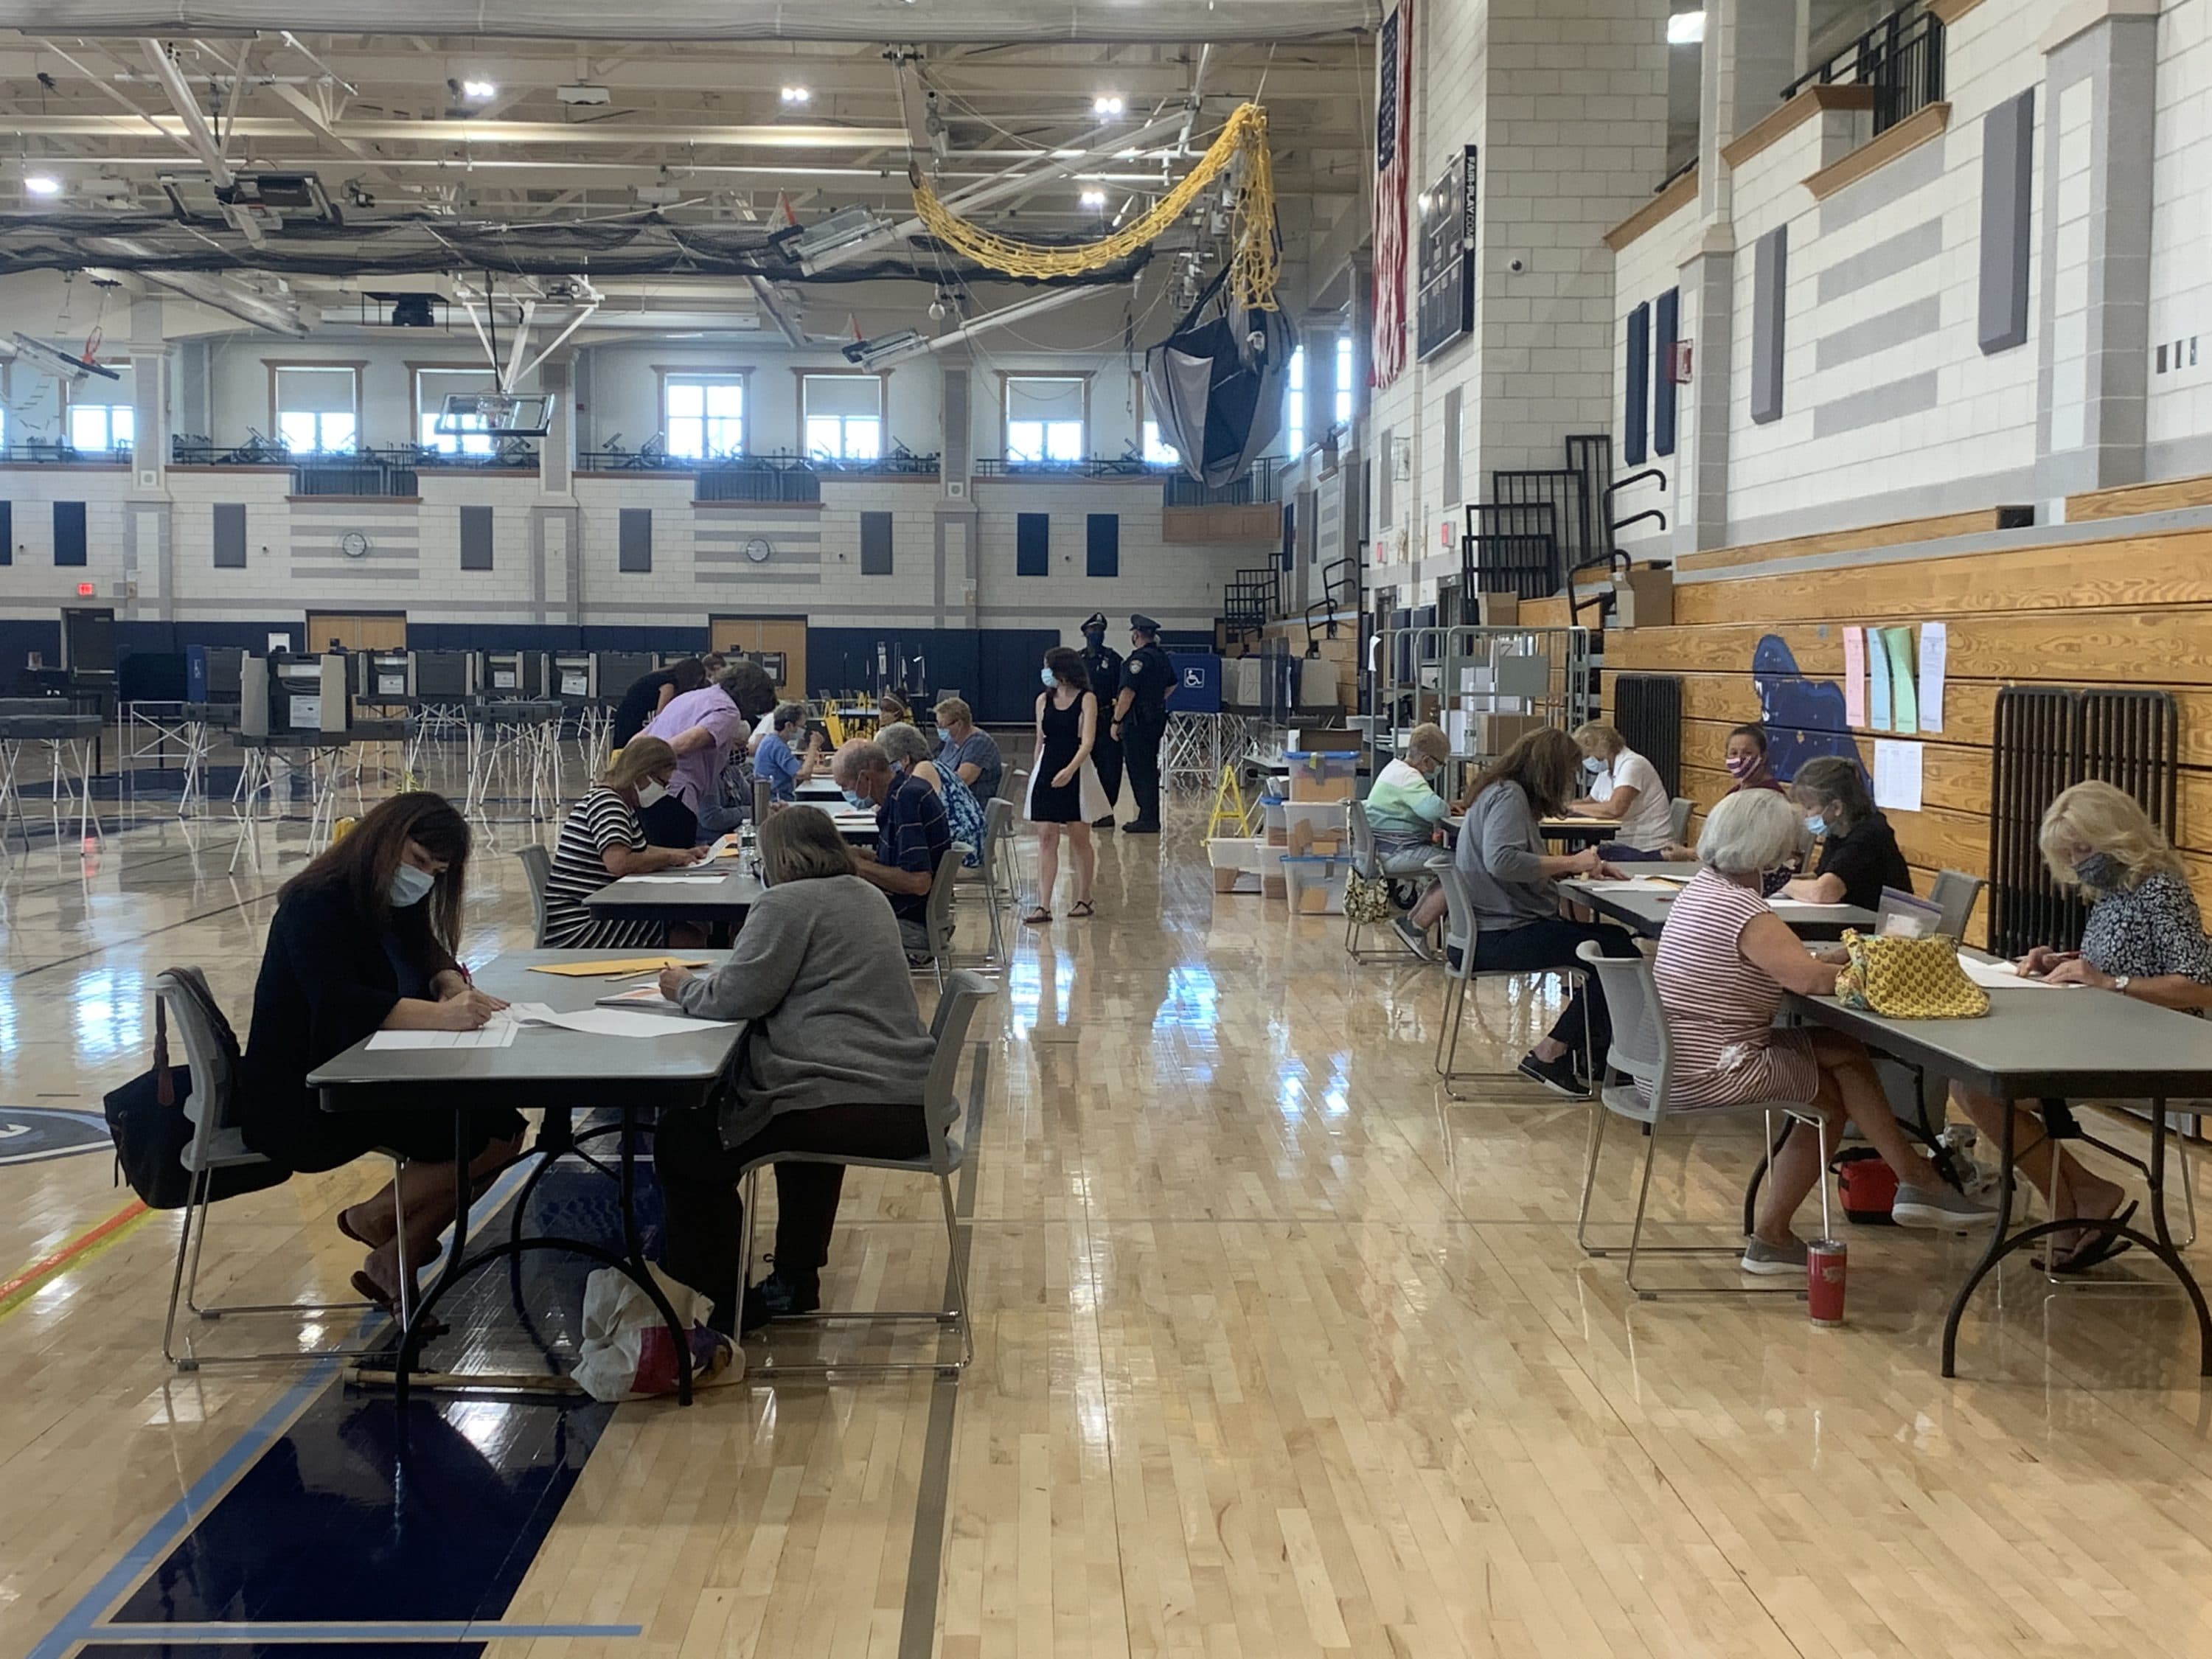 Election workers and staffers from the Secretary of State's office continue to count votes in Franklin, where roughly 3,000 uncounted ballots were discovered two days after Tuesday's primary. (Simón Rios/WBUR)